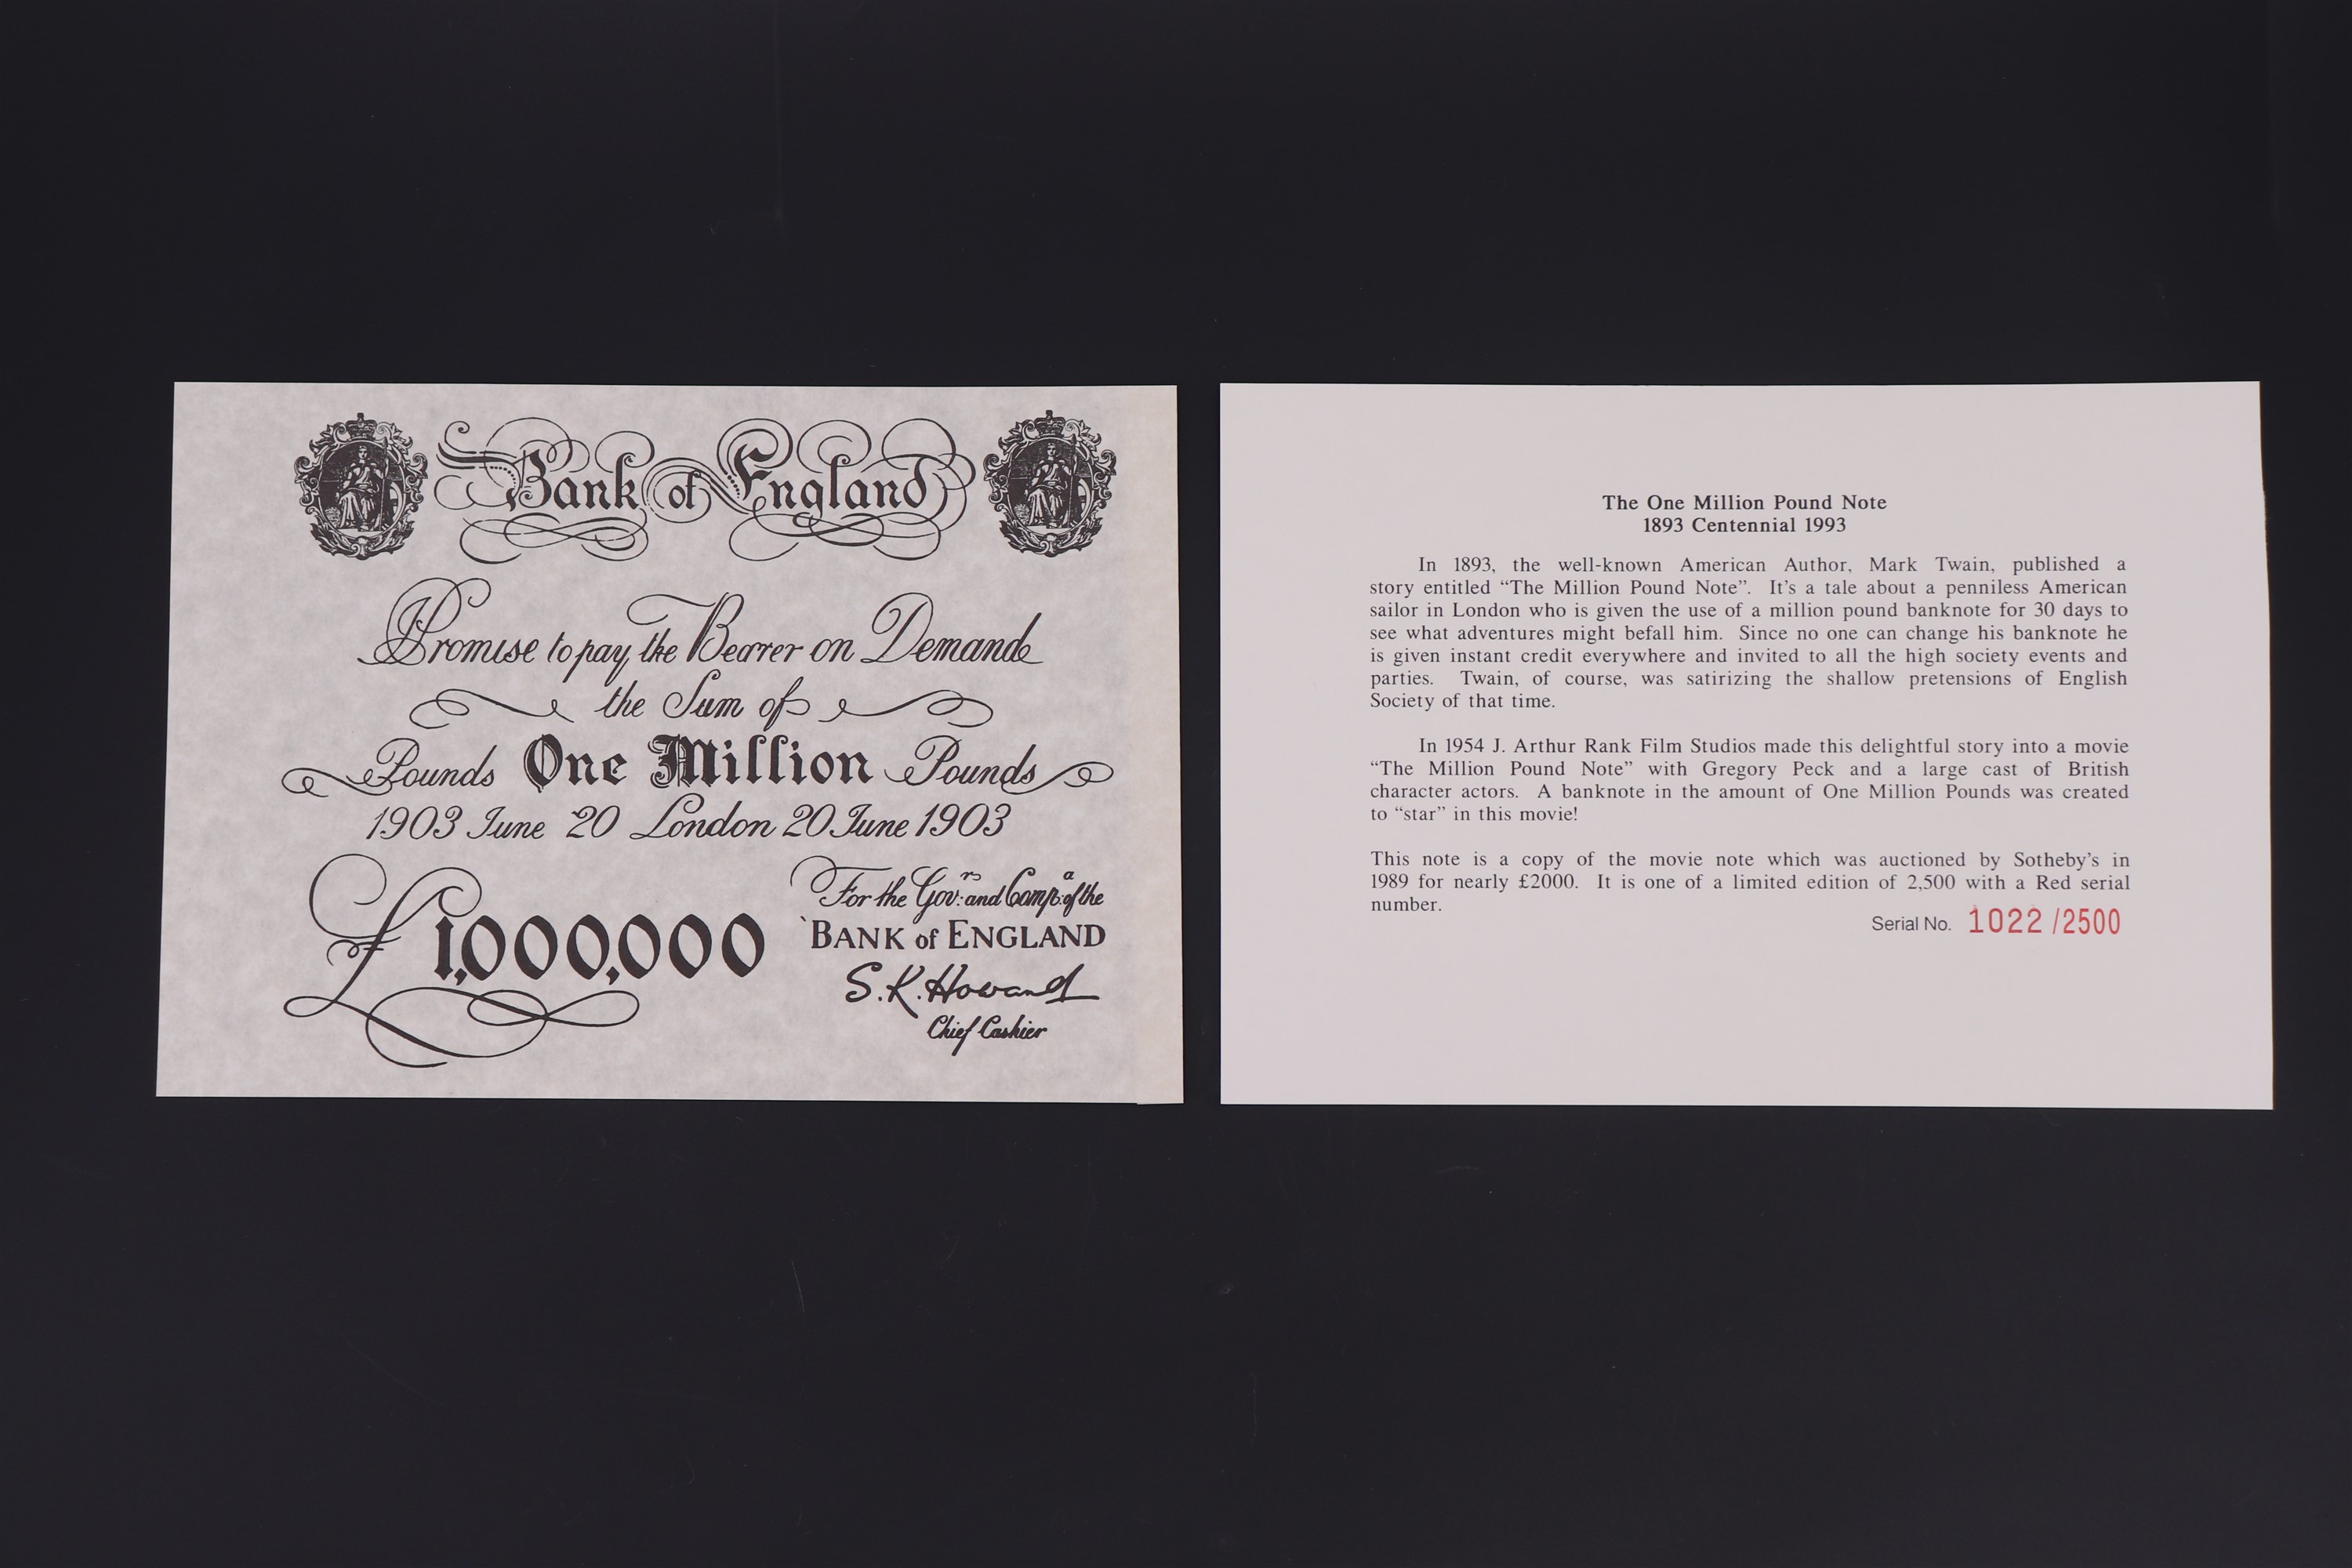 The One Million Pound Note limited edition copy, 1022/2500 [Originally from Mark Twain's 1893